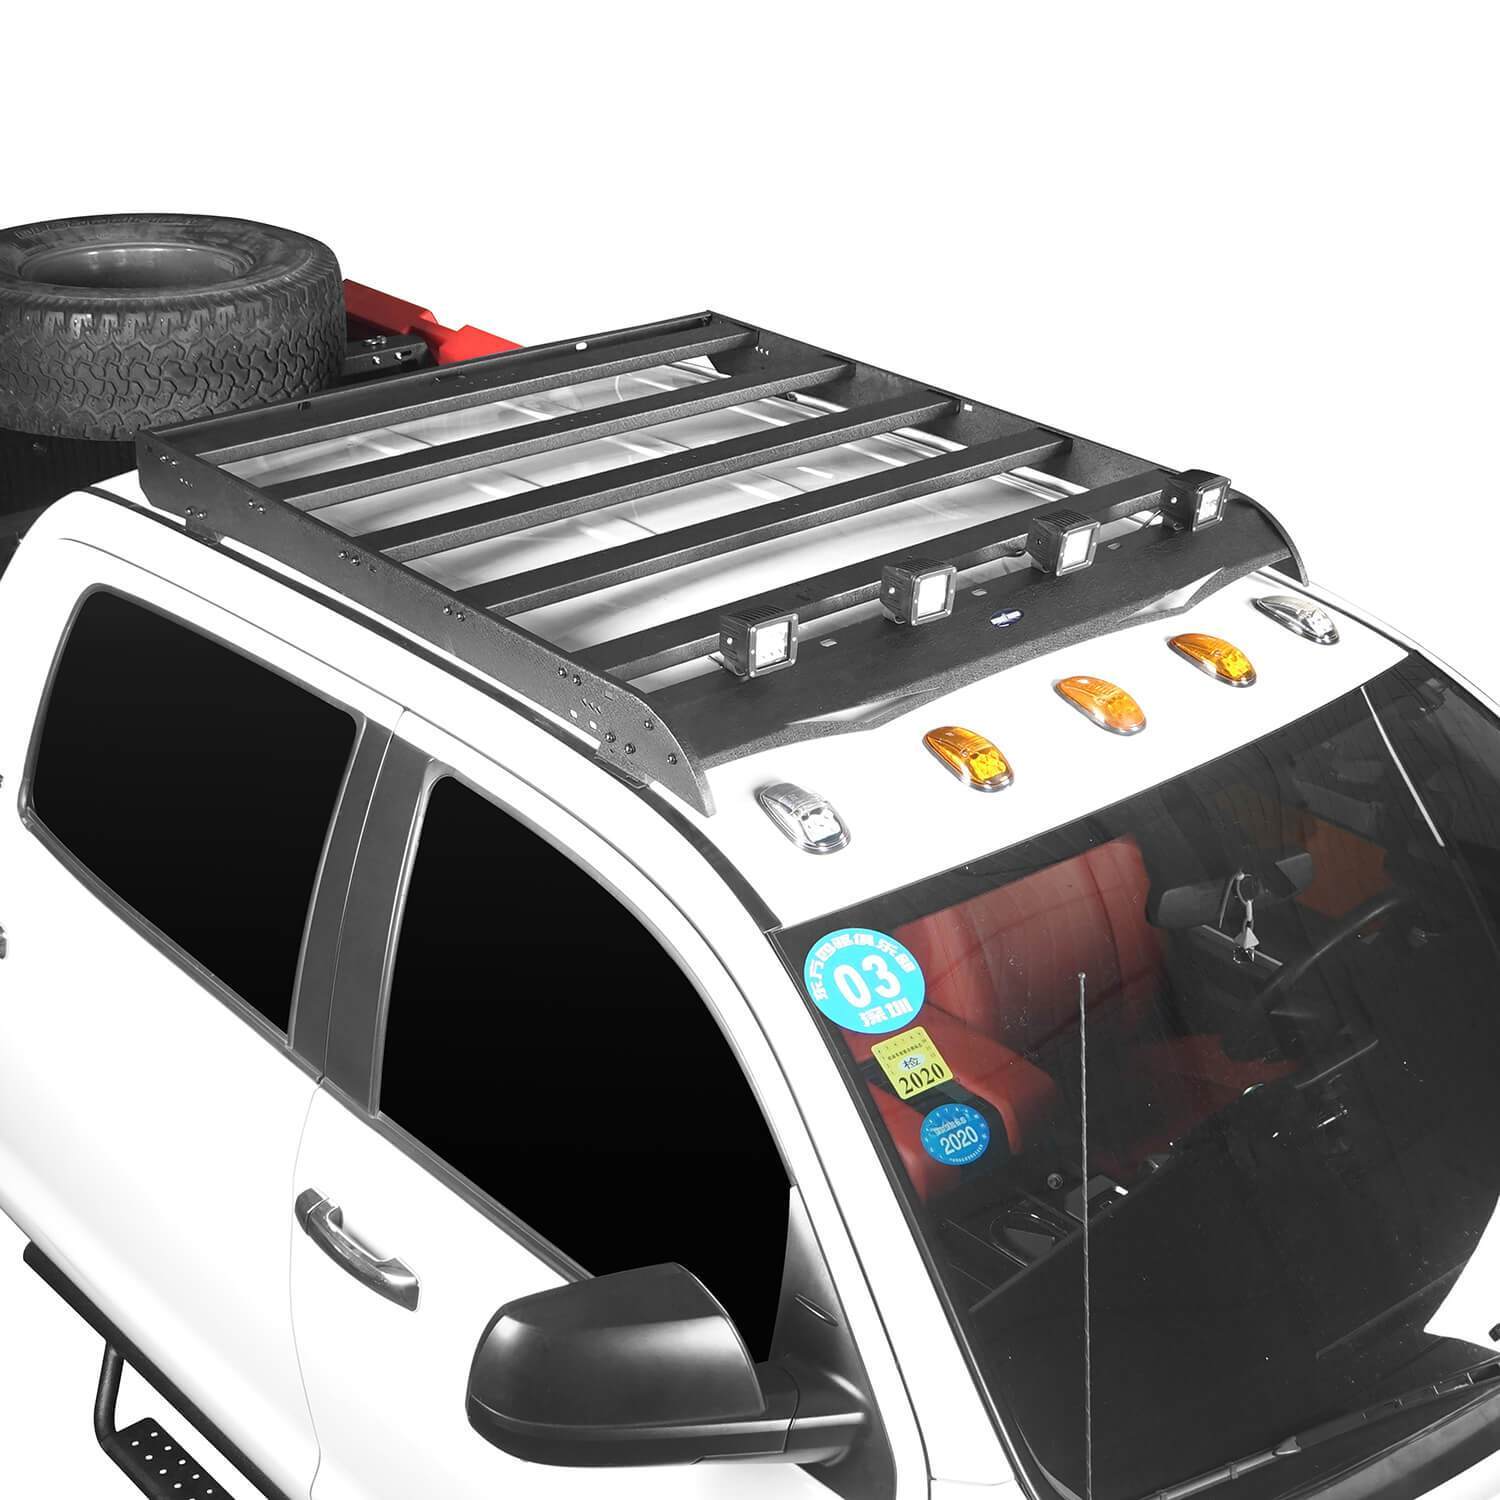 Toyota Tundra Crewmax Roof Rack Cargo Carrier for 2014-2020 Toyota